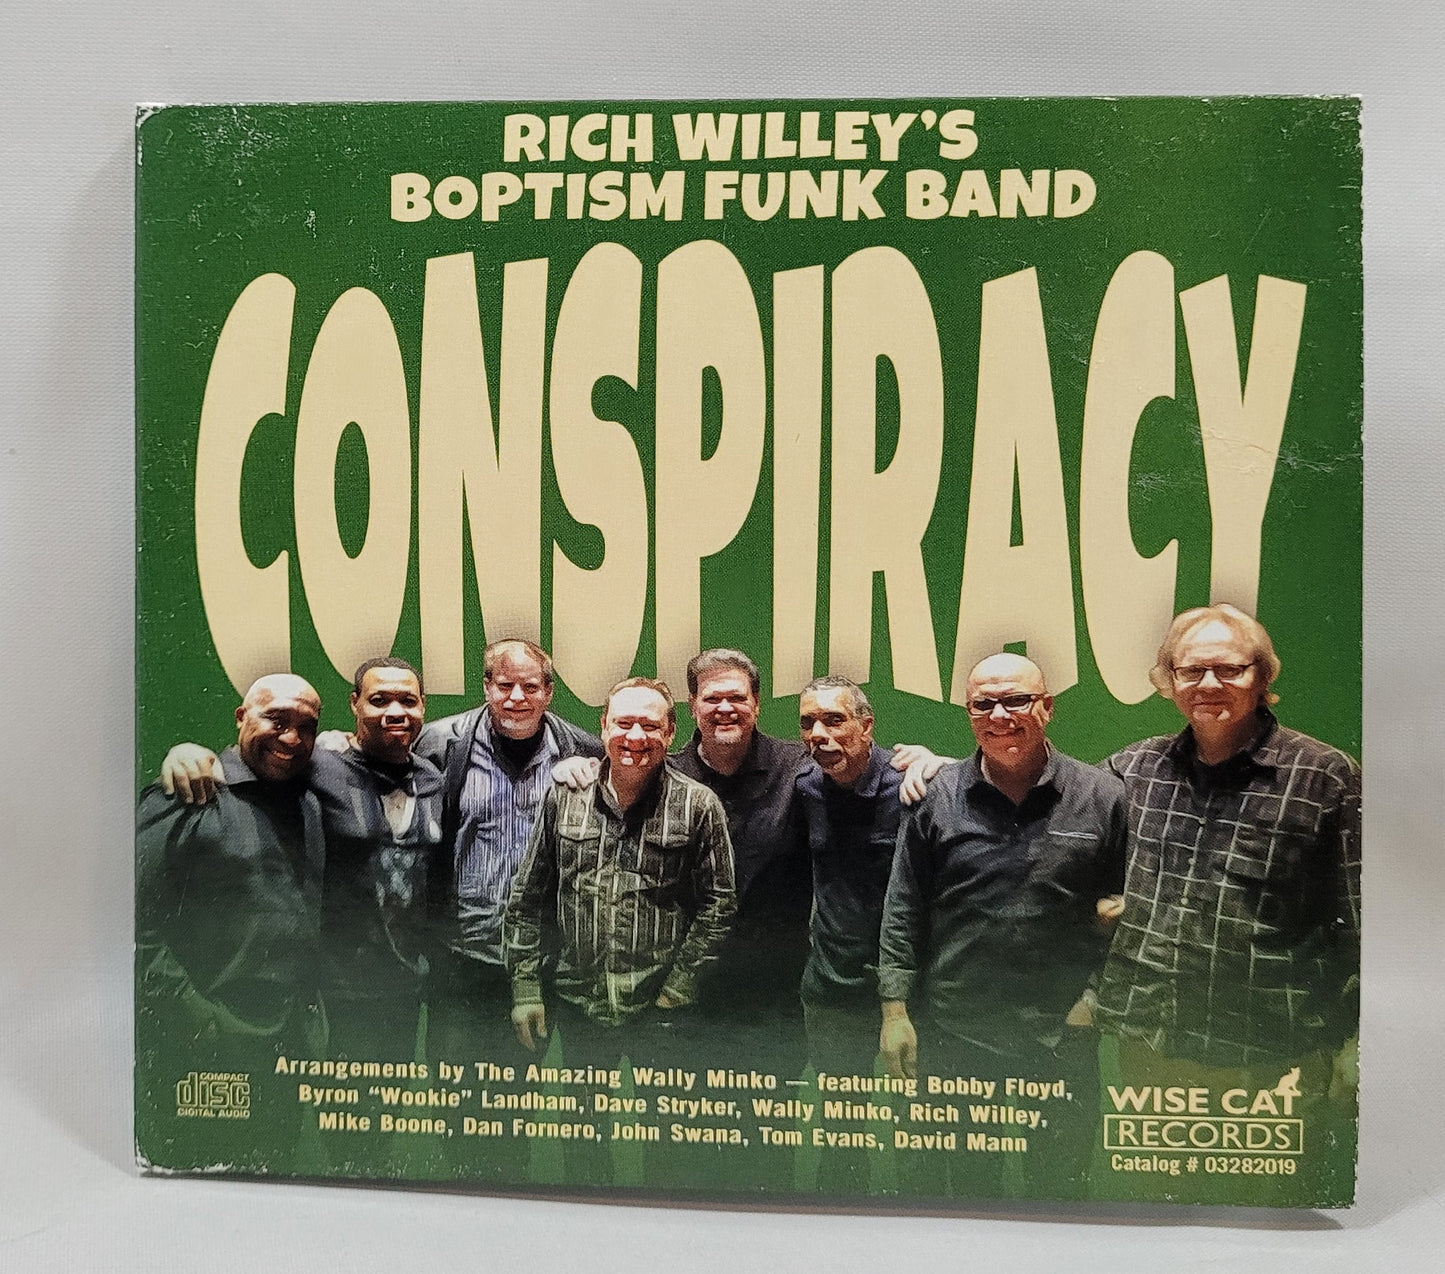 Rich Willey's Boptism Funk Band - Conspiracy [CD]